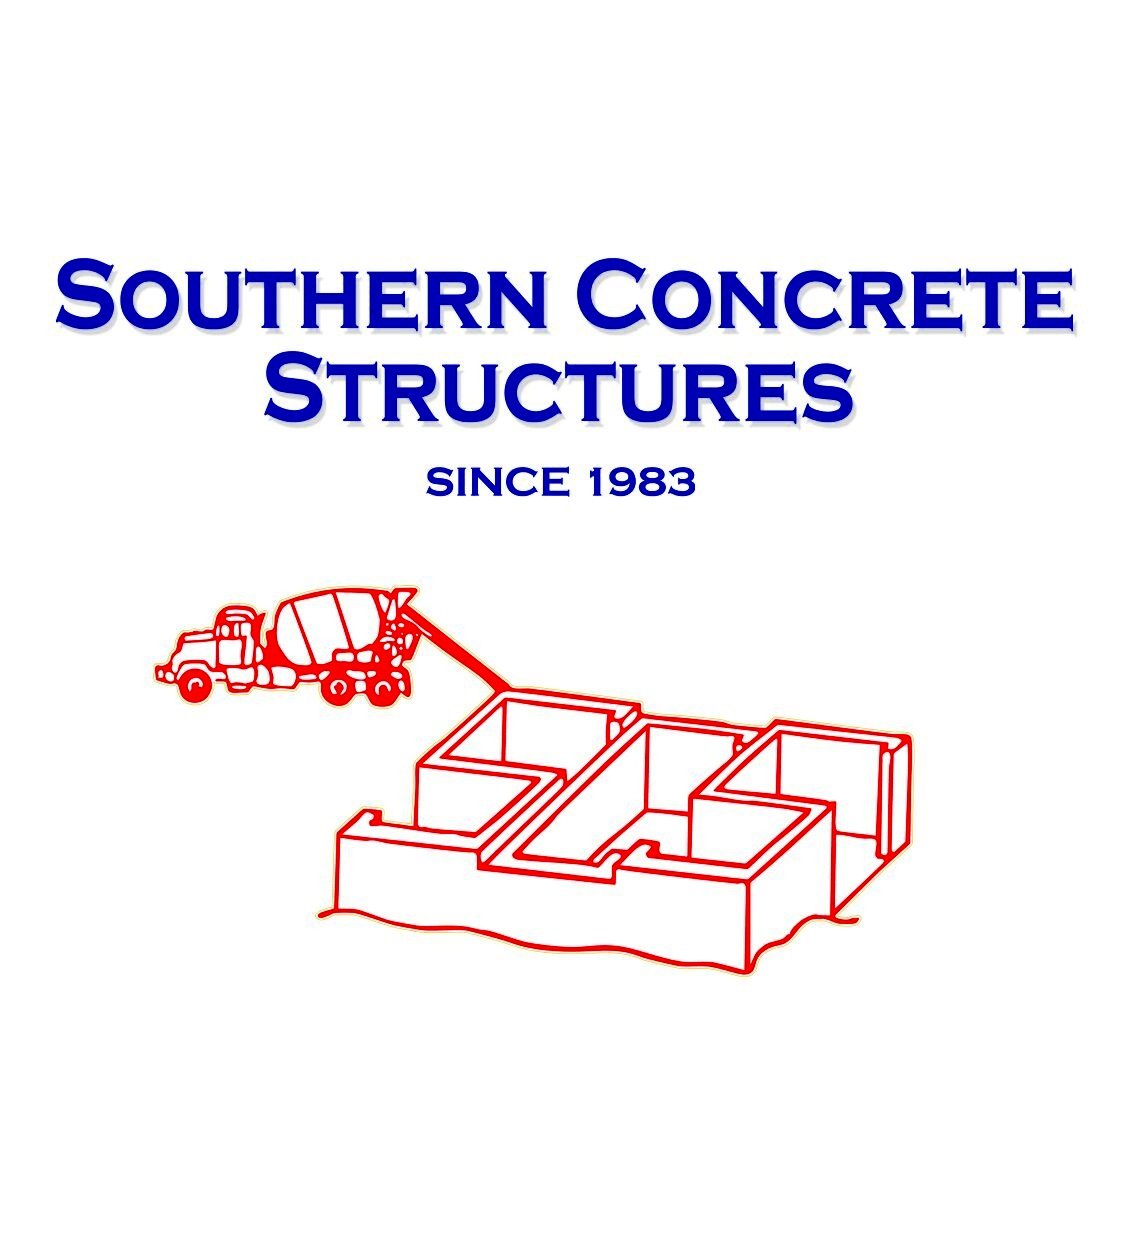 Southern Concrete Structures